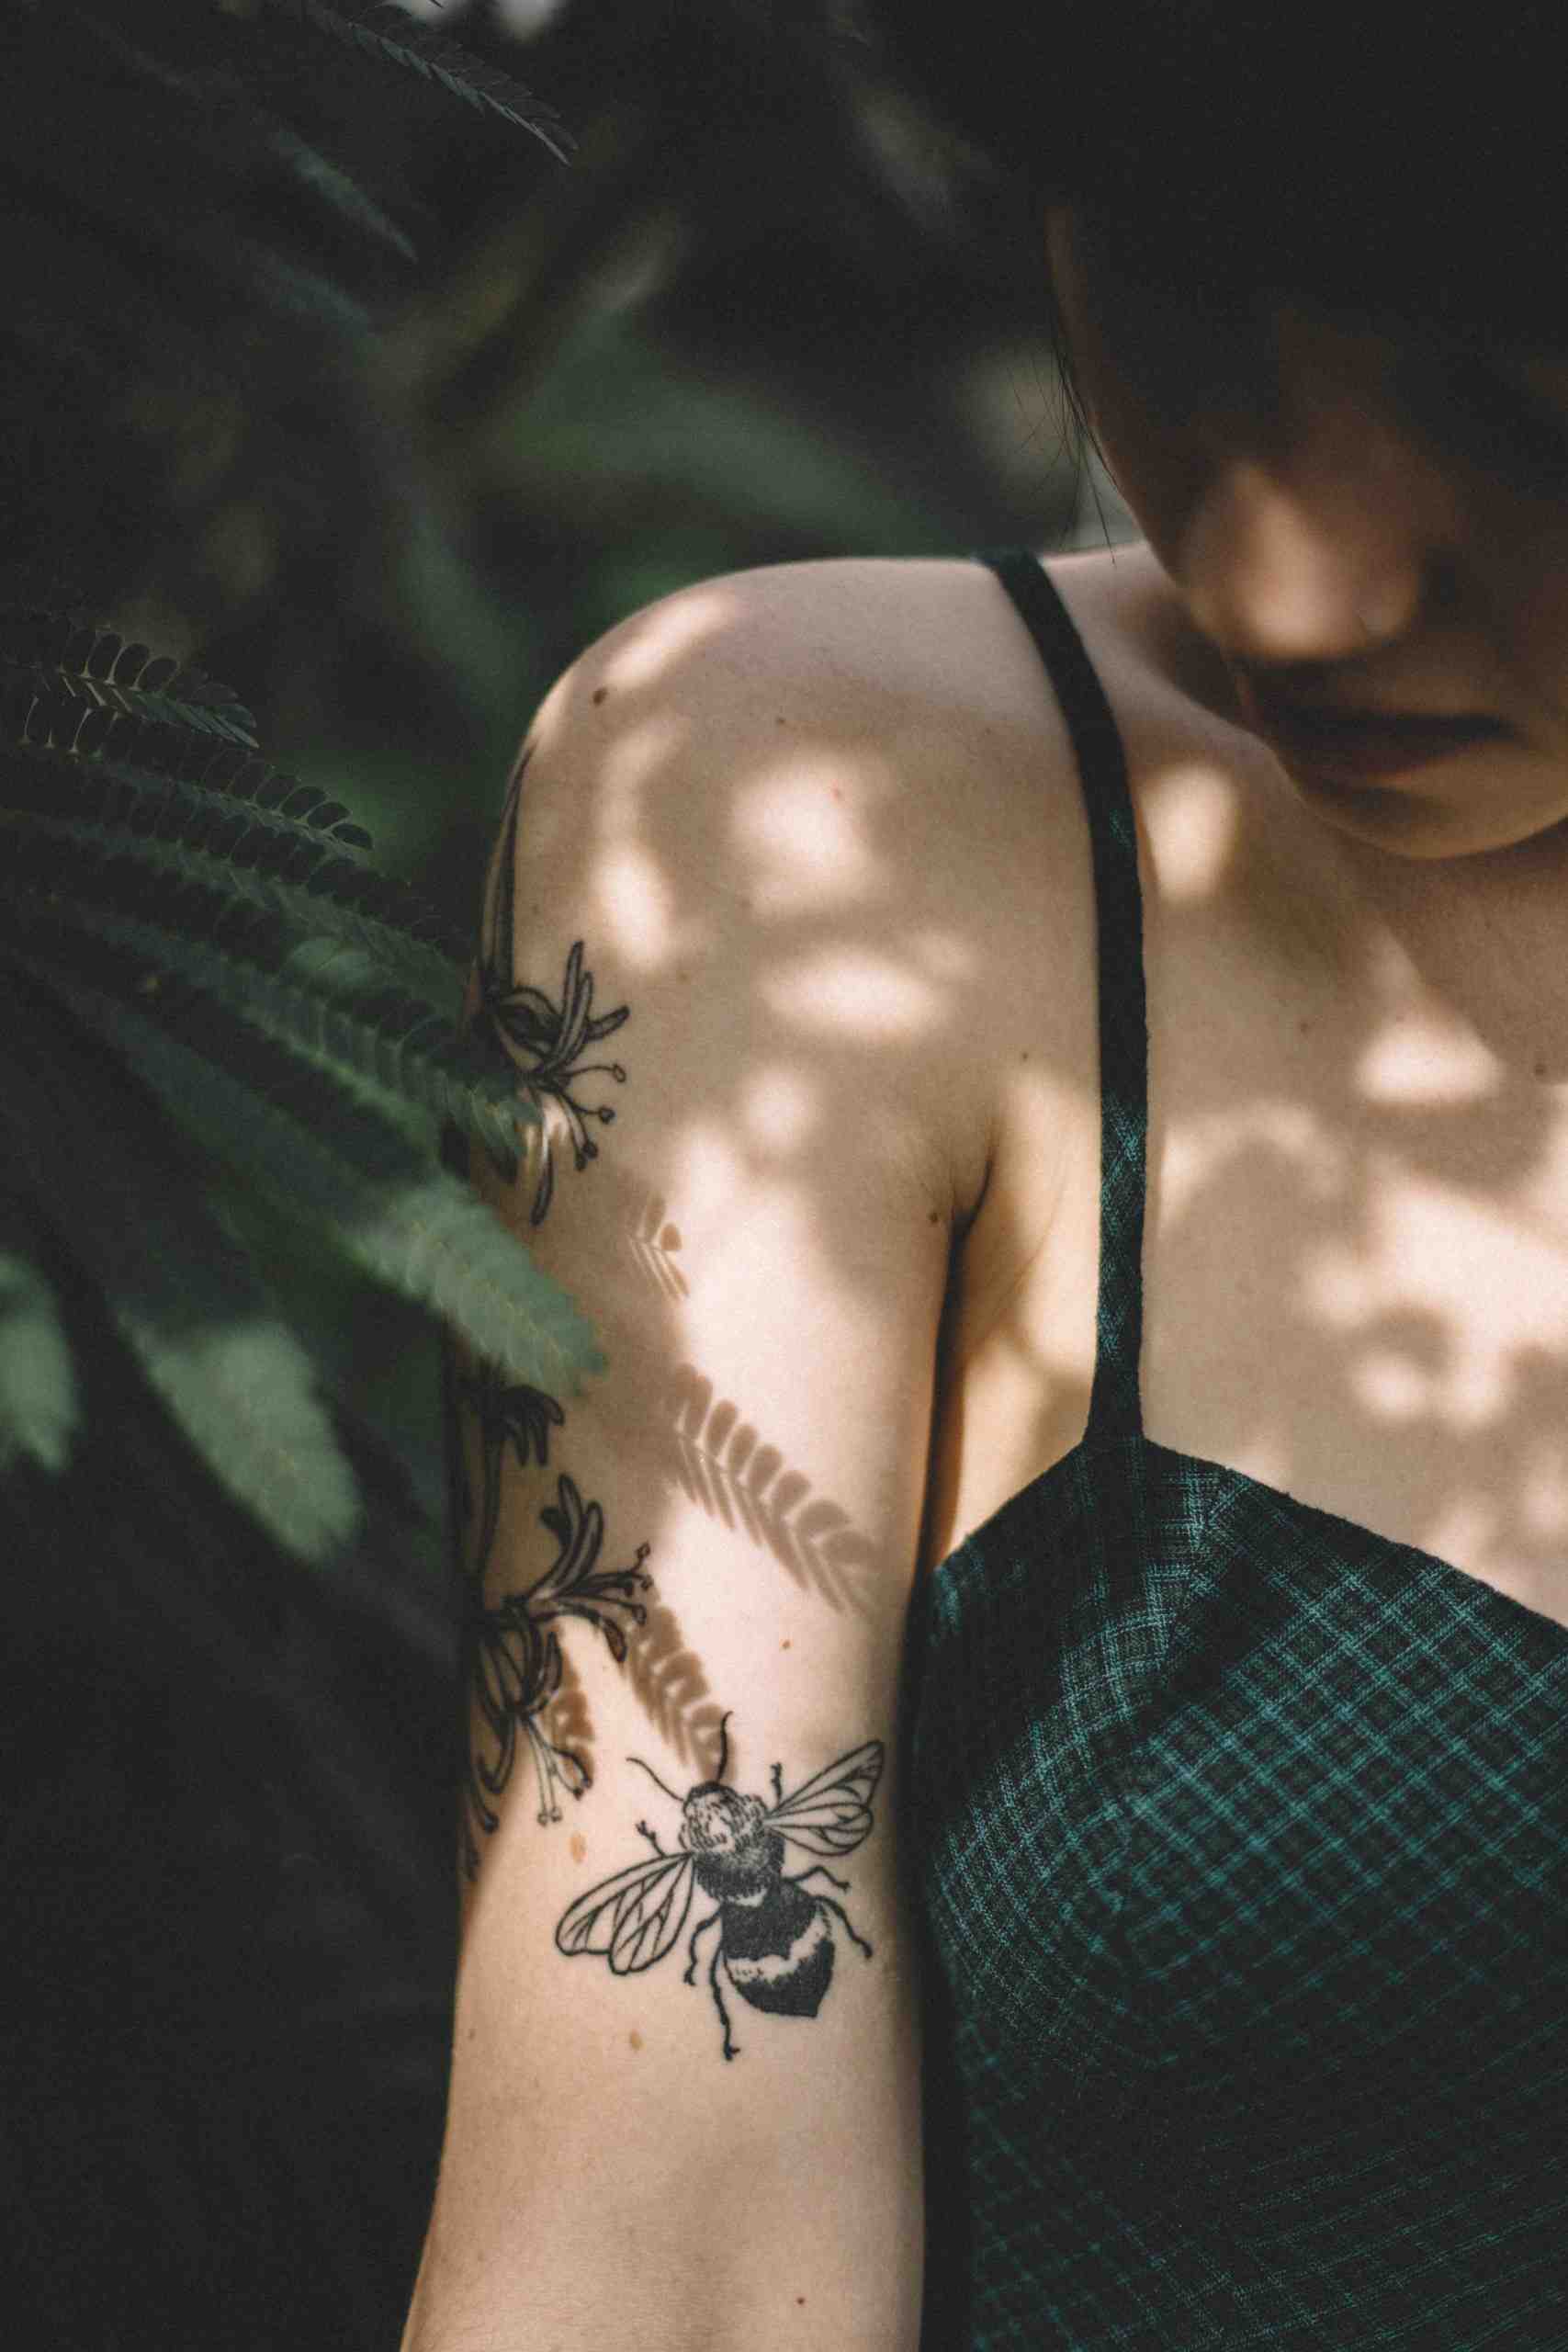 Do tattoos compromise your immune system?